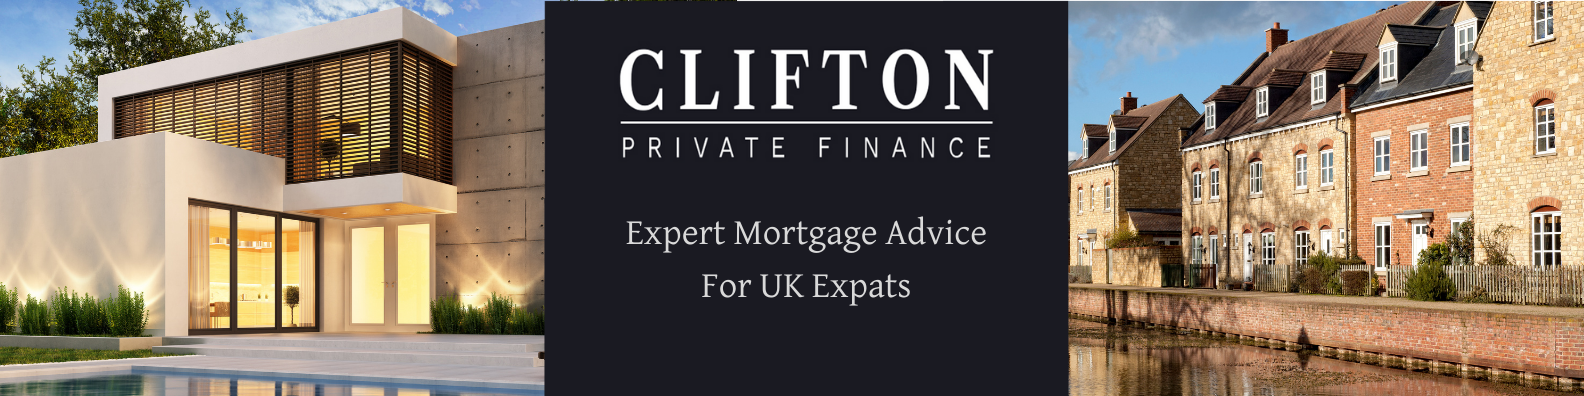 Expat mortgage specialist brokers, Clifton Private Finance